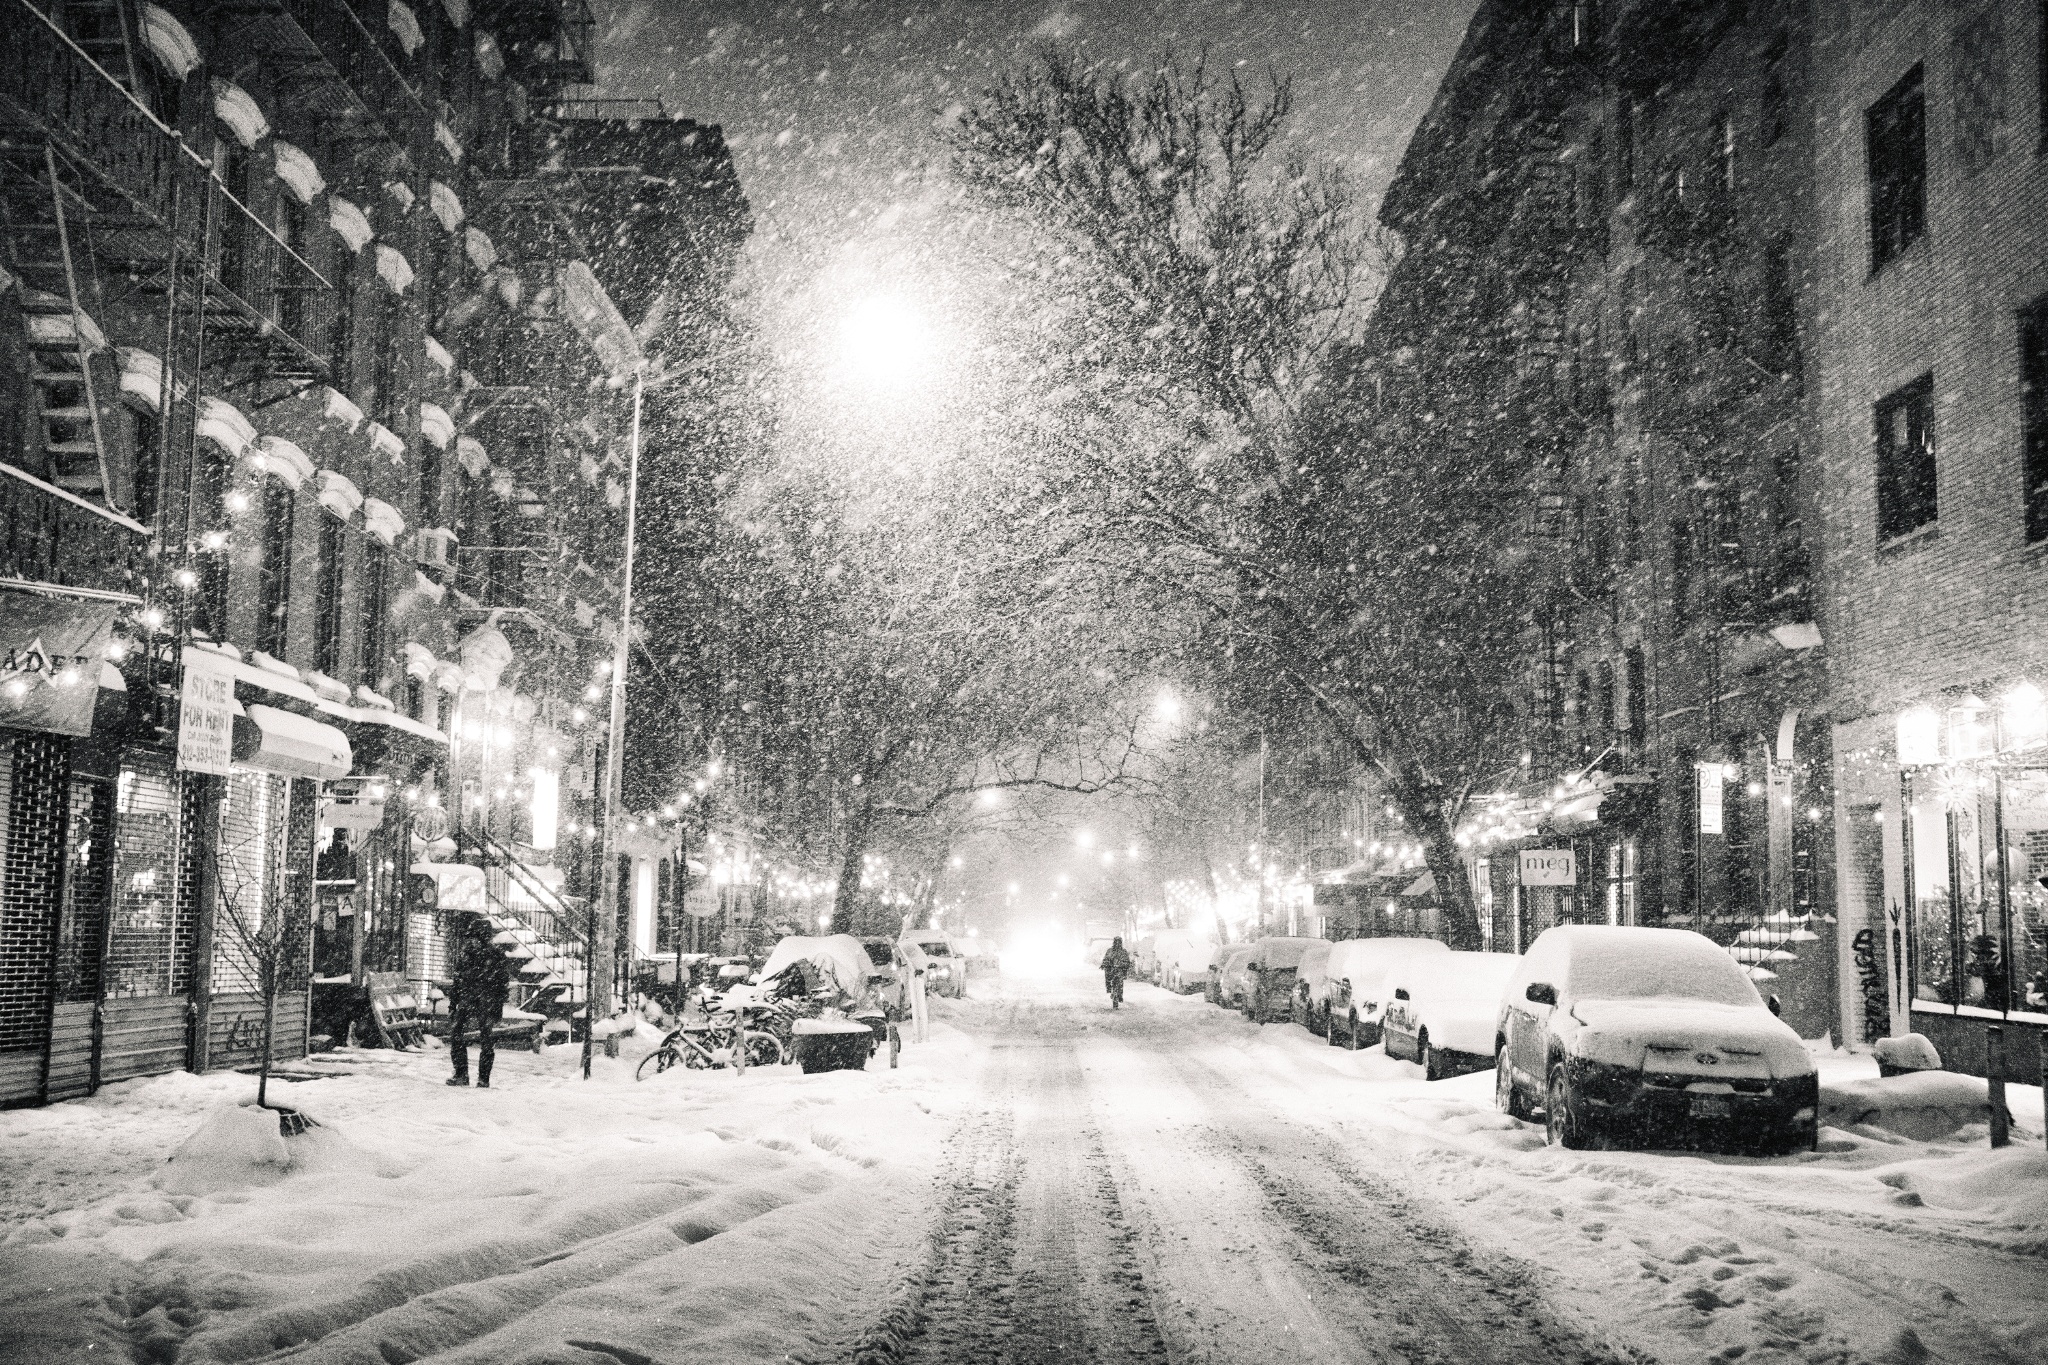 These 21 New York City Blizzard Pics Show What's In Store for the #Blizzardof2015